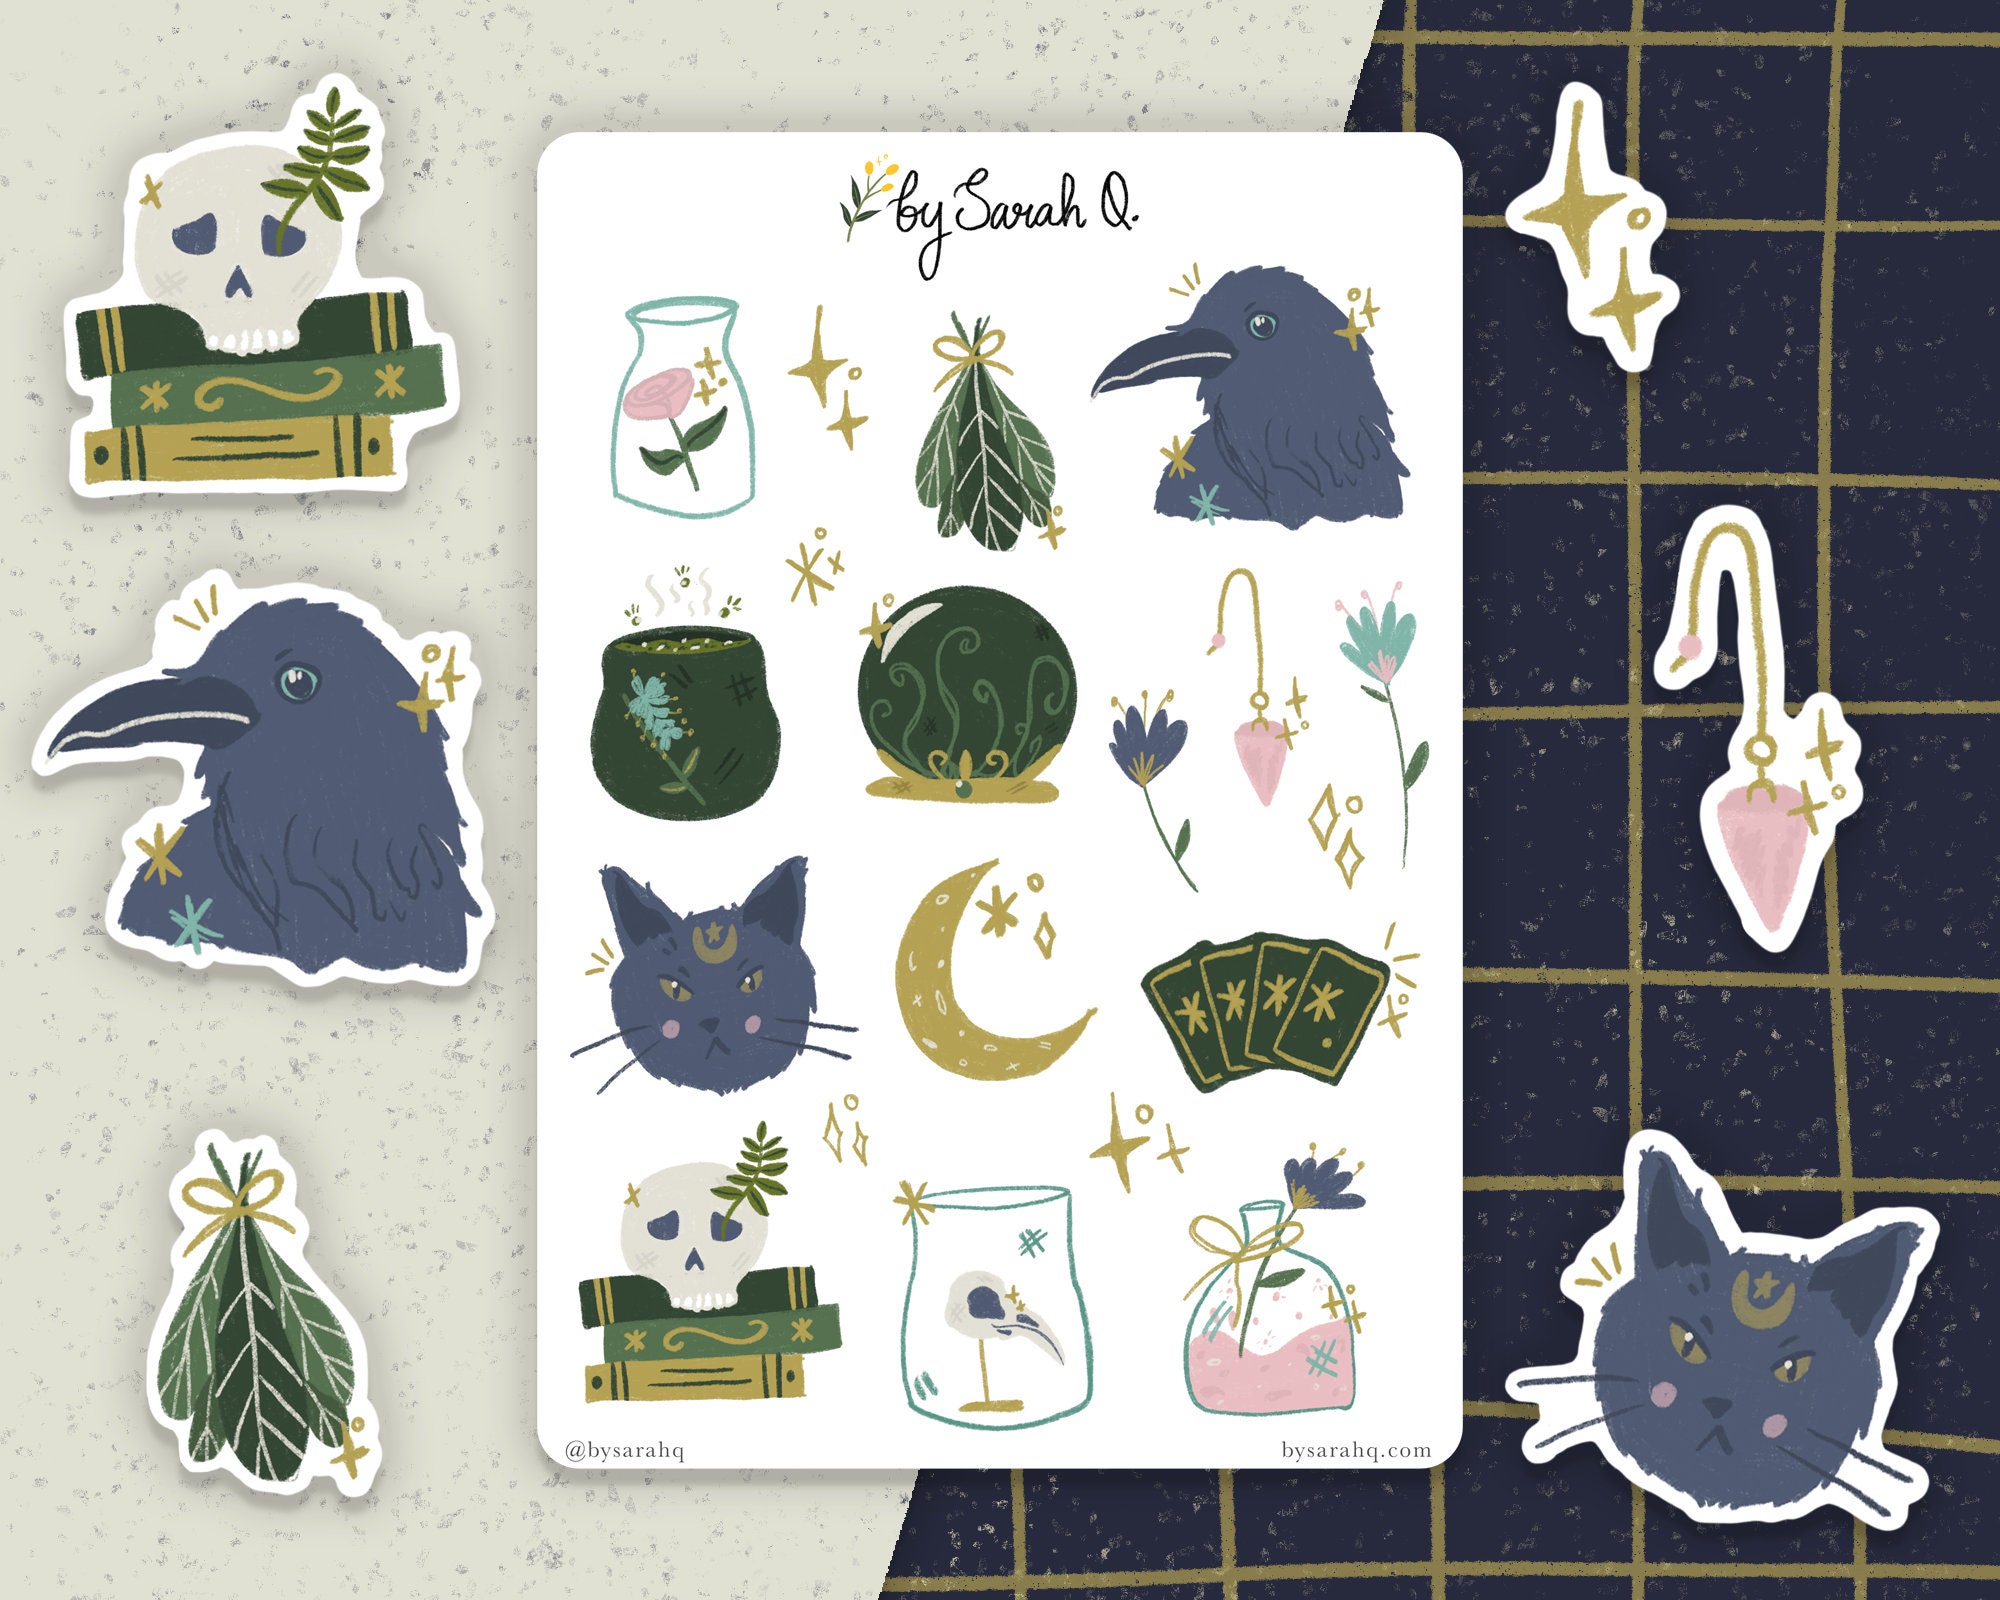 Magical Witchy Stickersheet // Bullet Journal Witchy Stickers, Cute BUJO  Doodle Sticker, Magic Witch Stickers, Scrapbook 